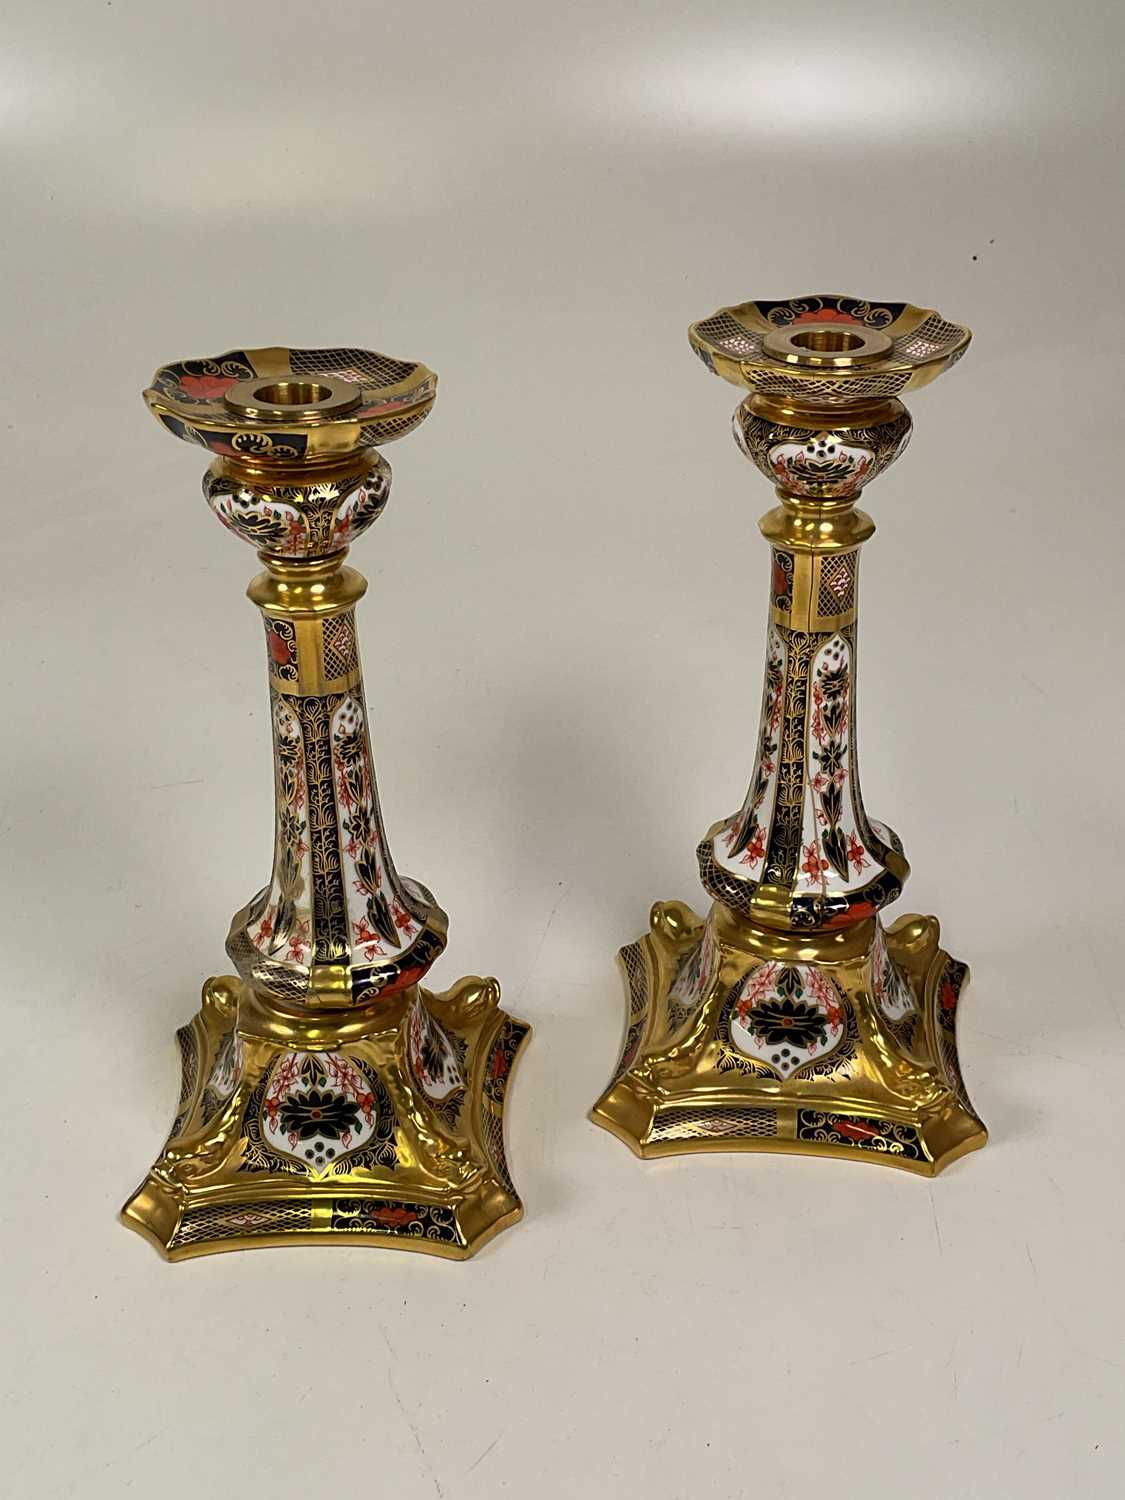 Royal Crown Derby pair of candlesticks Condition Report: The top part of the candlesticks are